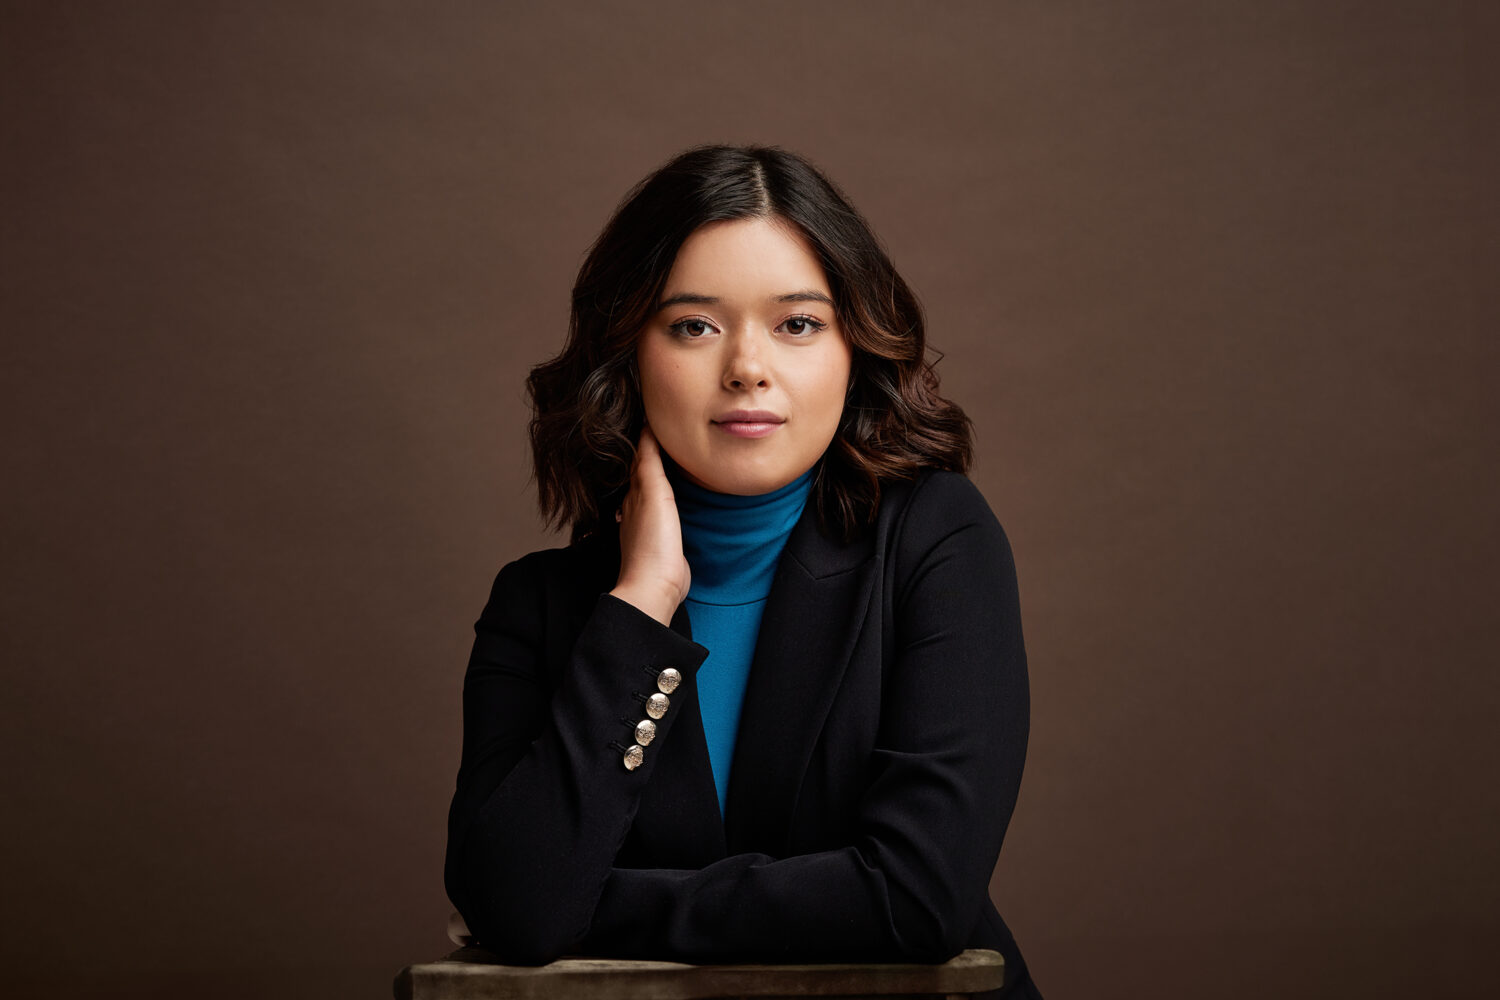 Corporate headshot of Steph by Photoform*.
Steph is wearing a blue turtleneck and black jacket and is against a dark brown background.